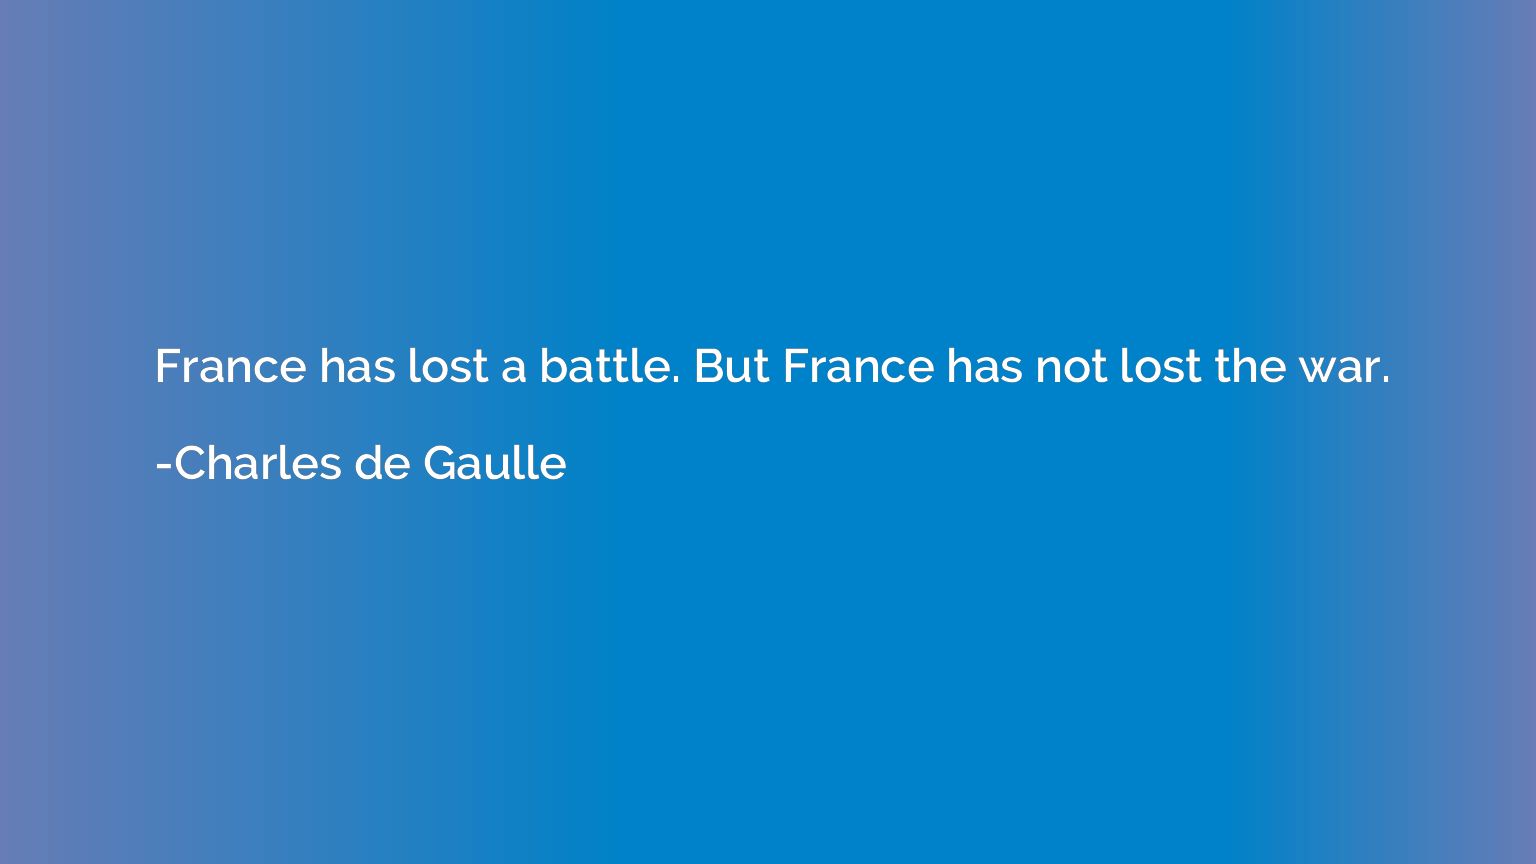 France has lost a battle. But France has not lost the war.